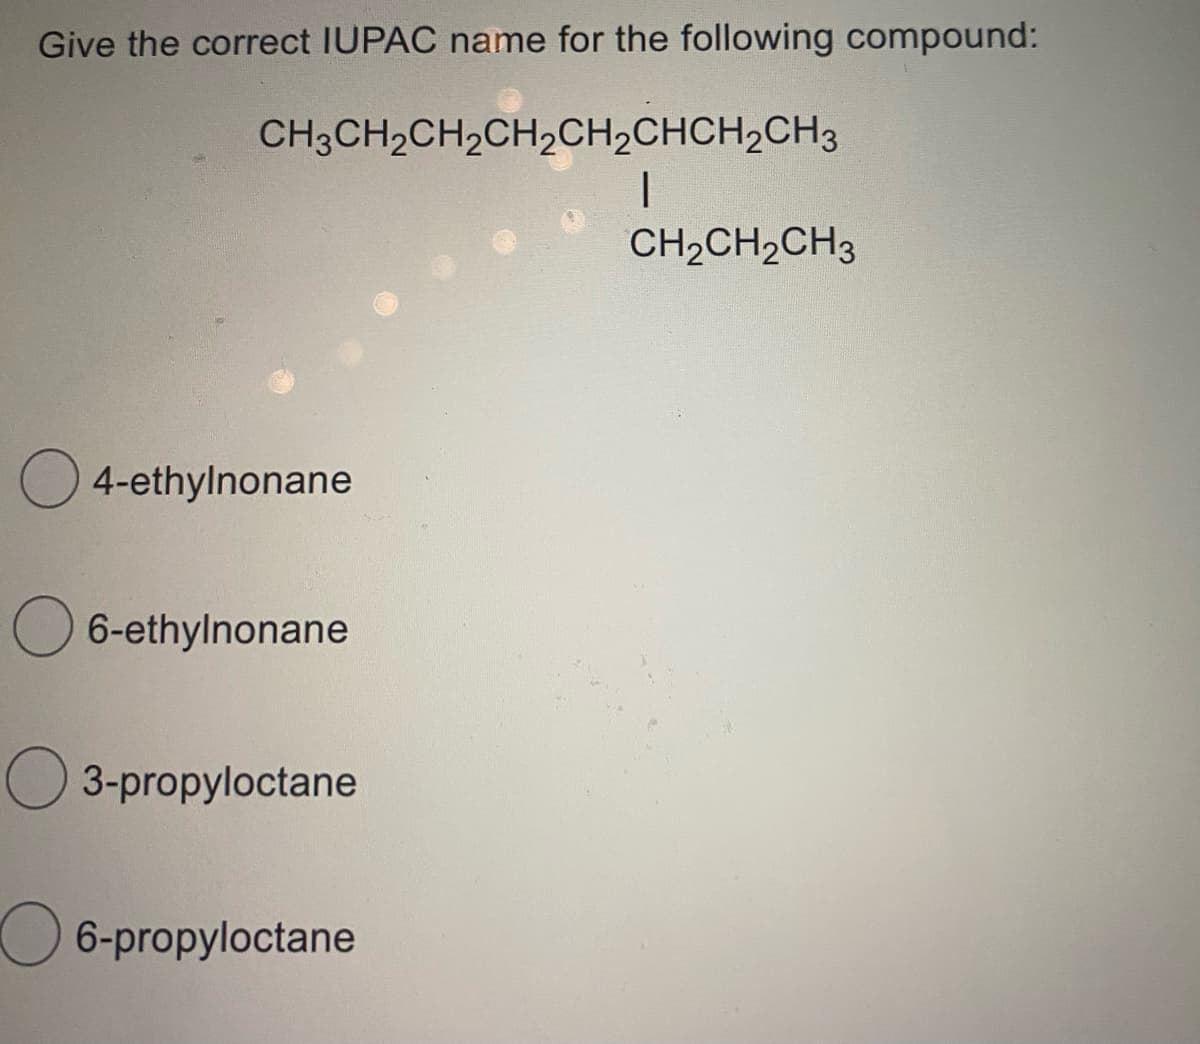 Give the correct IUPAC name for the following compound:
CH3CH2CH2CH2CH2CHCH2CH3
CH2CH2CH3
O 4-ethylnonane
O 6-ethylnonane
O 3-propyloctane
O 6-propyloctane
